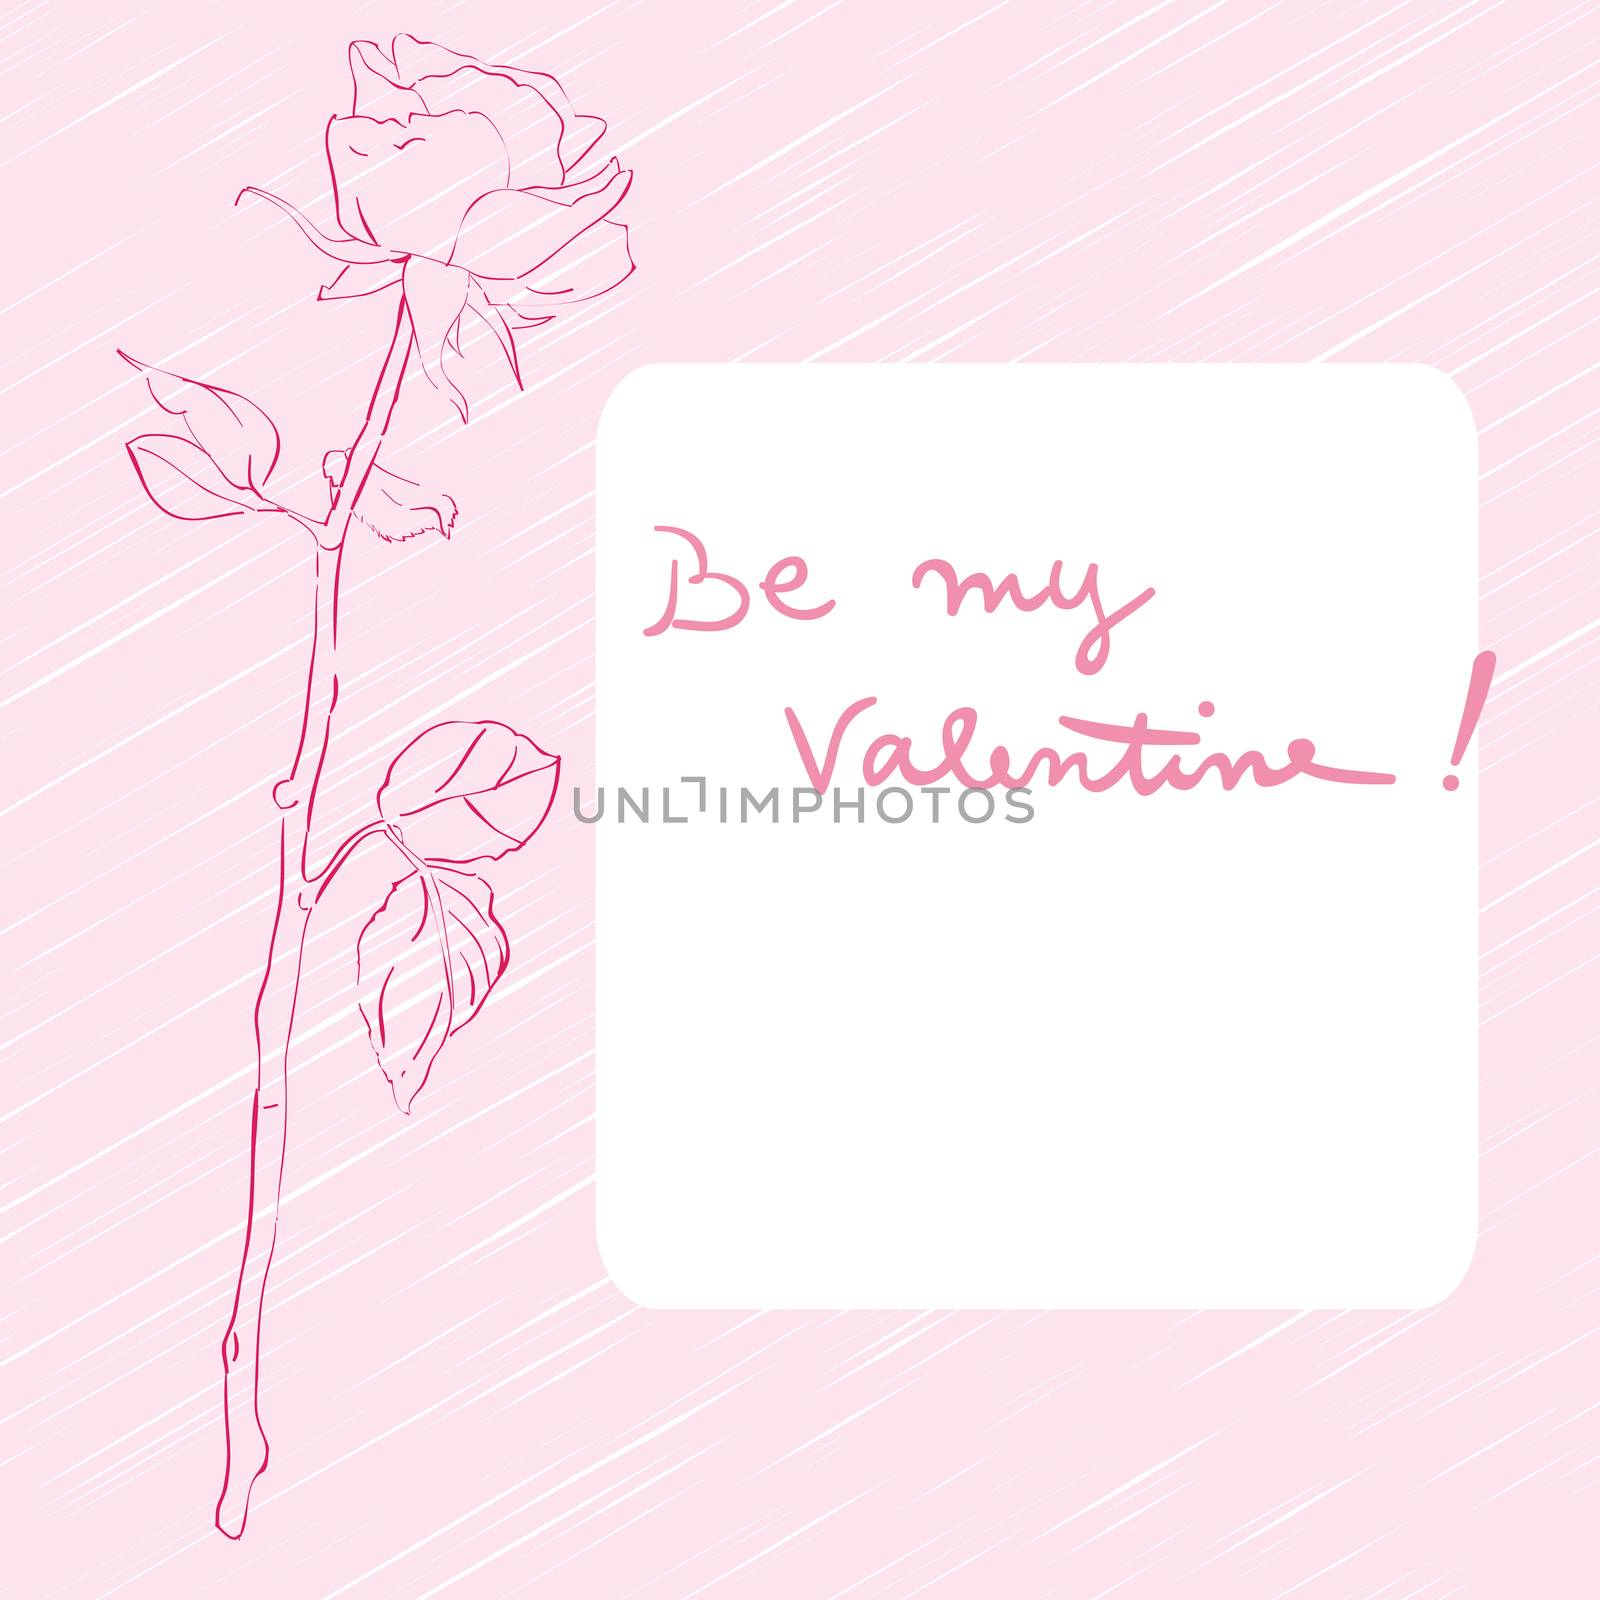 Valentine's Day card with rose hand drawn illustration over a vibrant pink background and text over white label